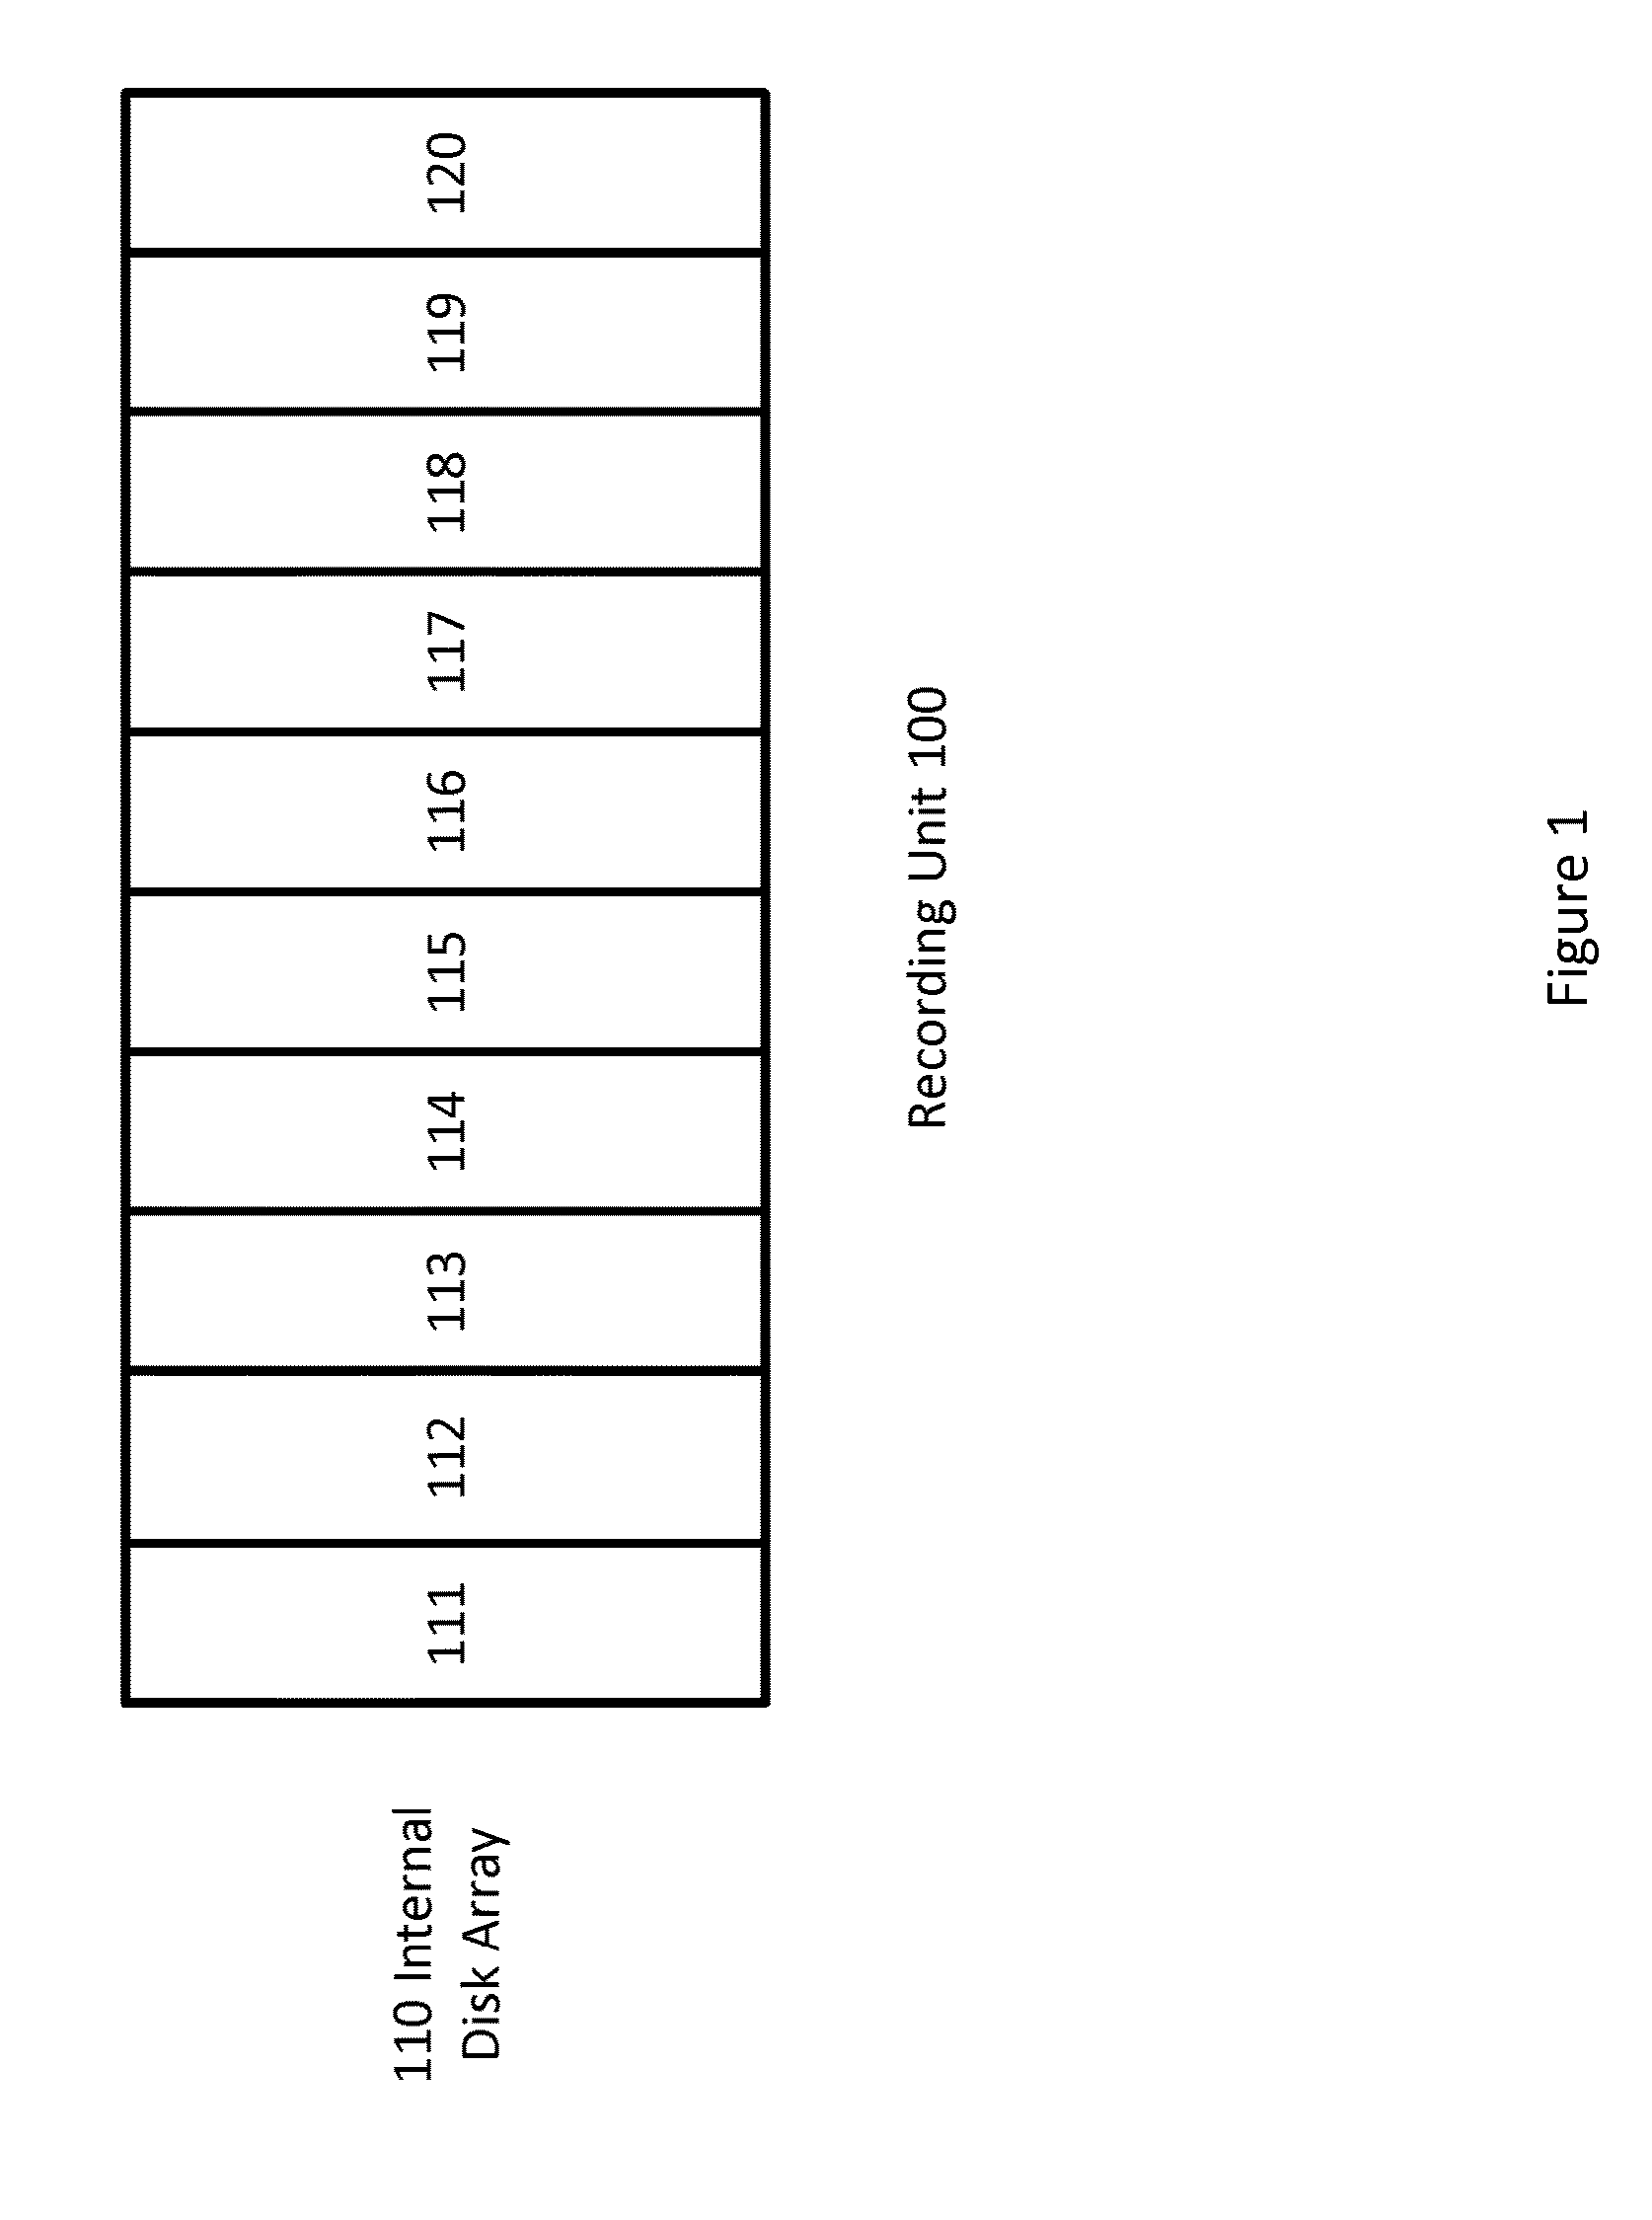 System and method for high-speed data recording